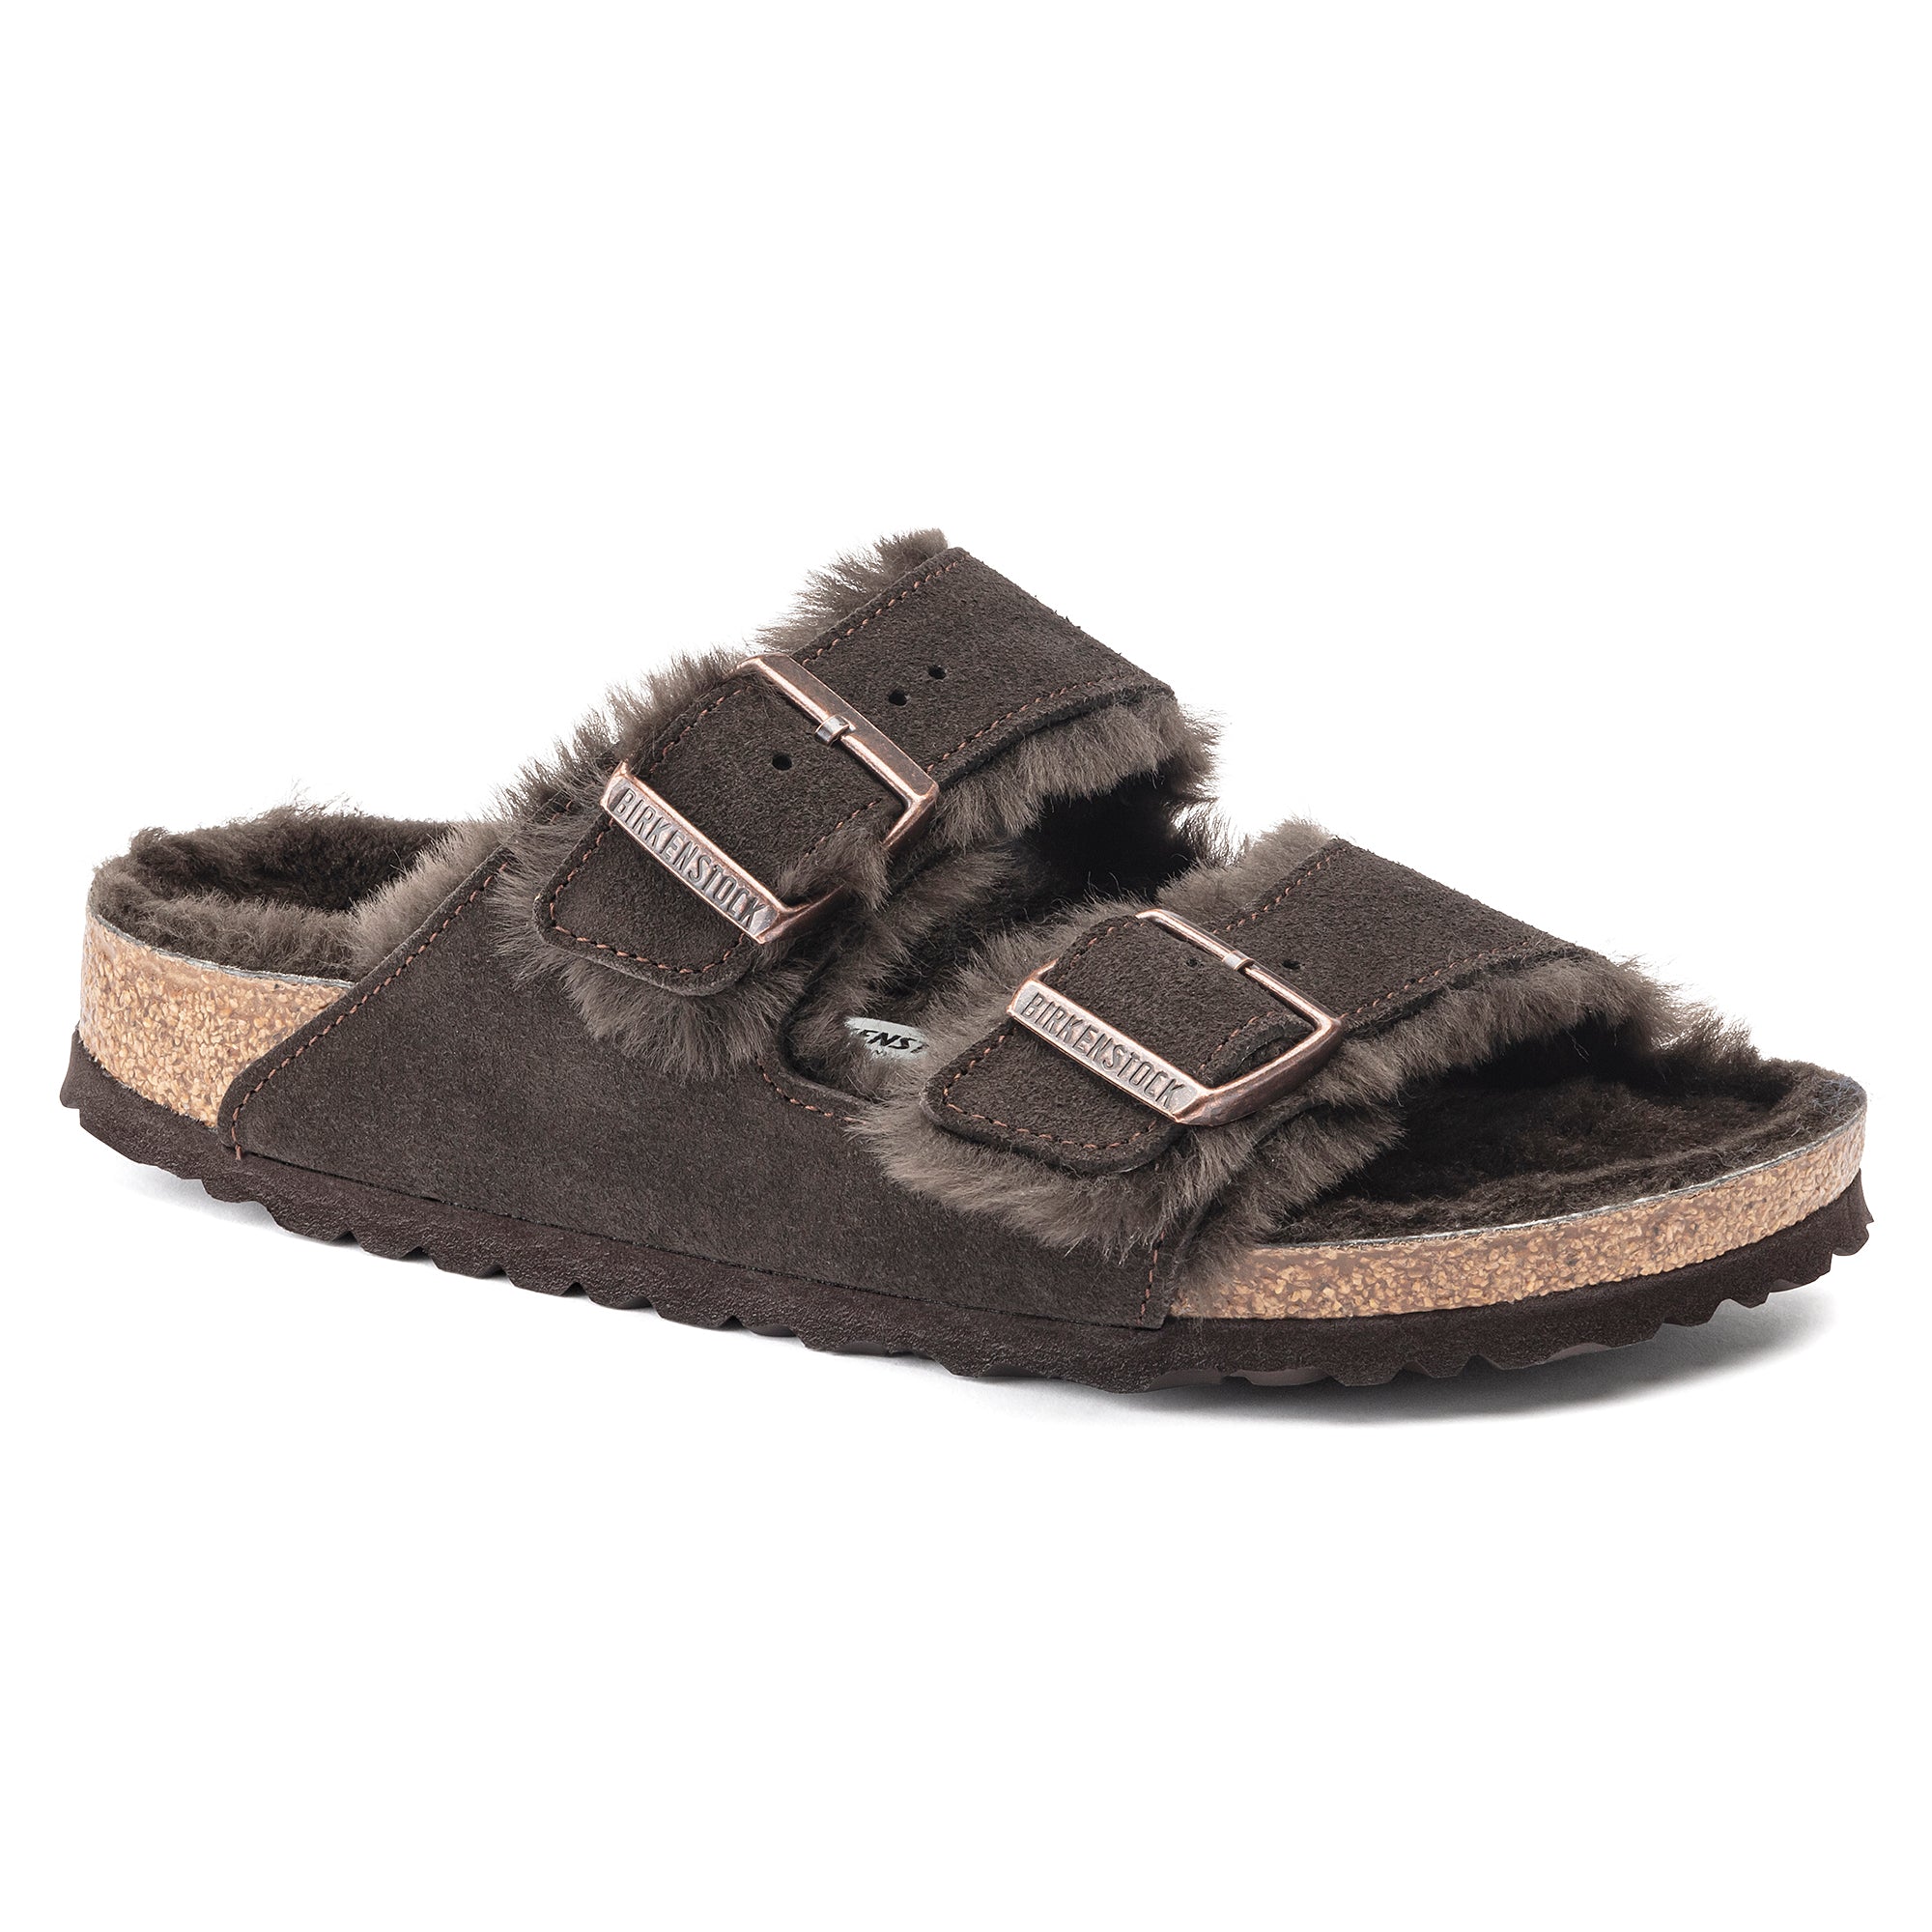 Arizona Shearling Suede/Shearling Leather in Mocca